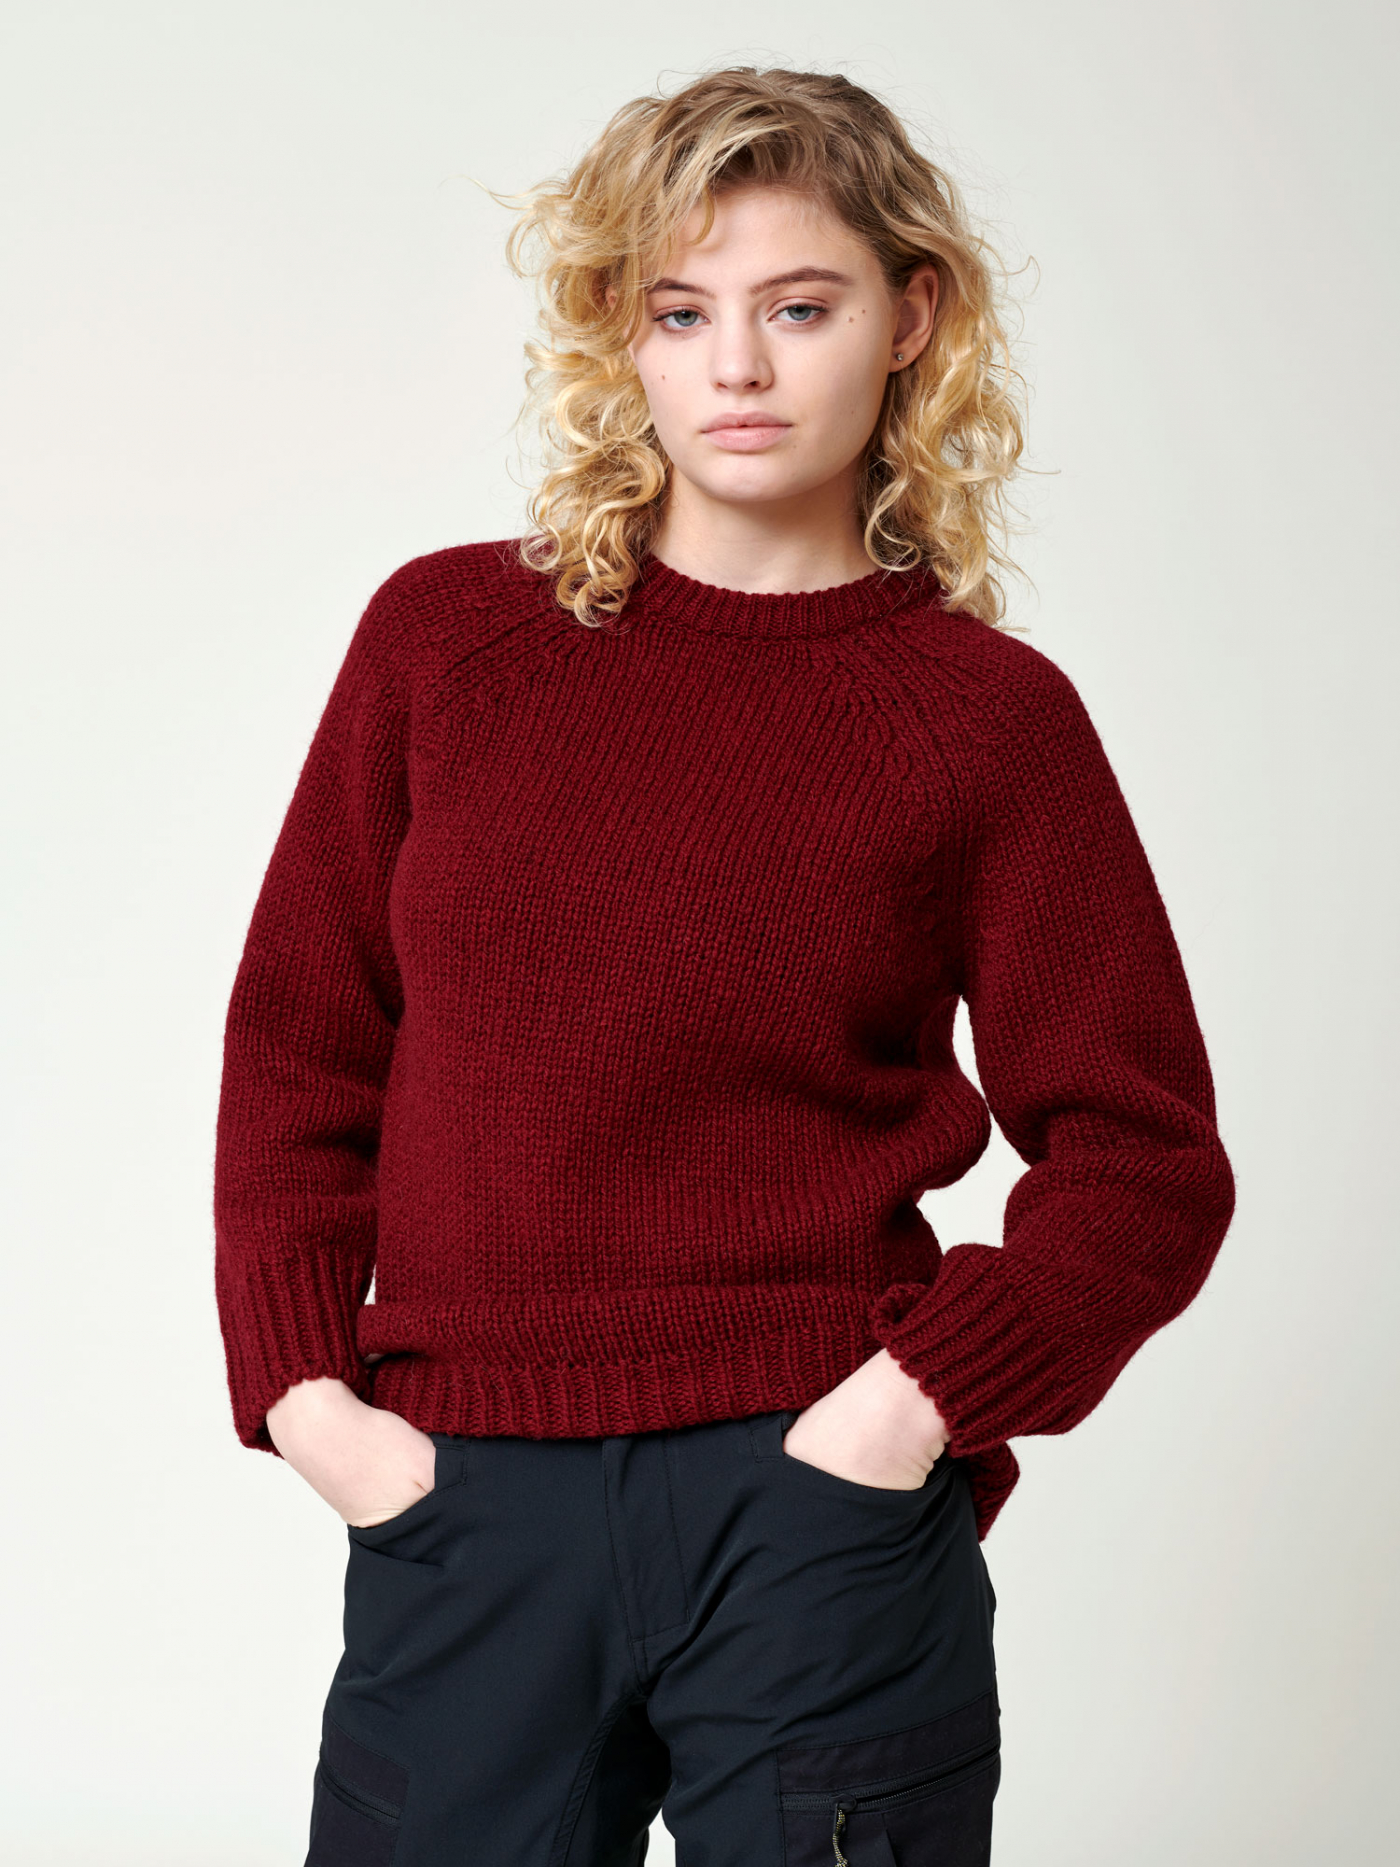 Introduction to Red Sweaters